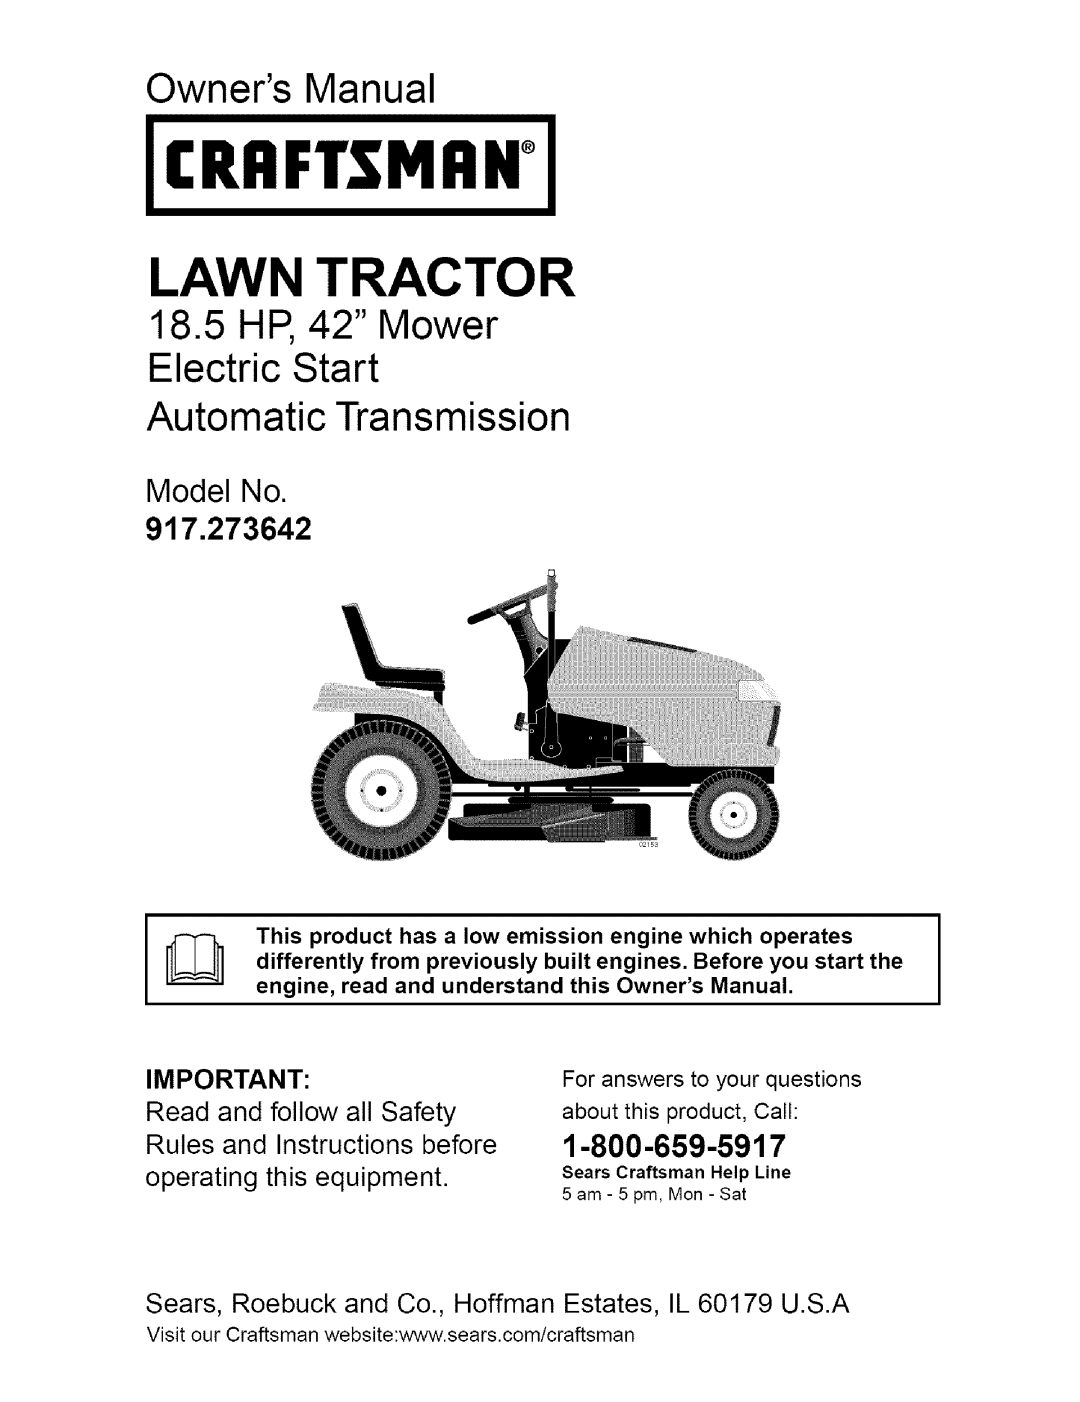 Craftsman 917.273642 manual Criiftsmhn, Lawn Tractor, Owners Manual, 18.5HP, 42 Mower Electric Start, Model No 